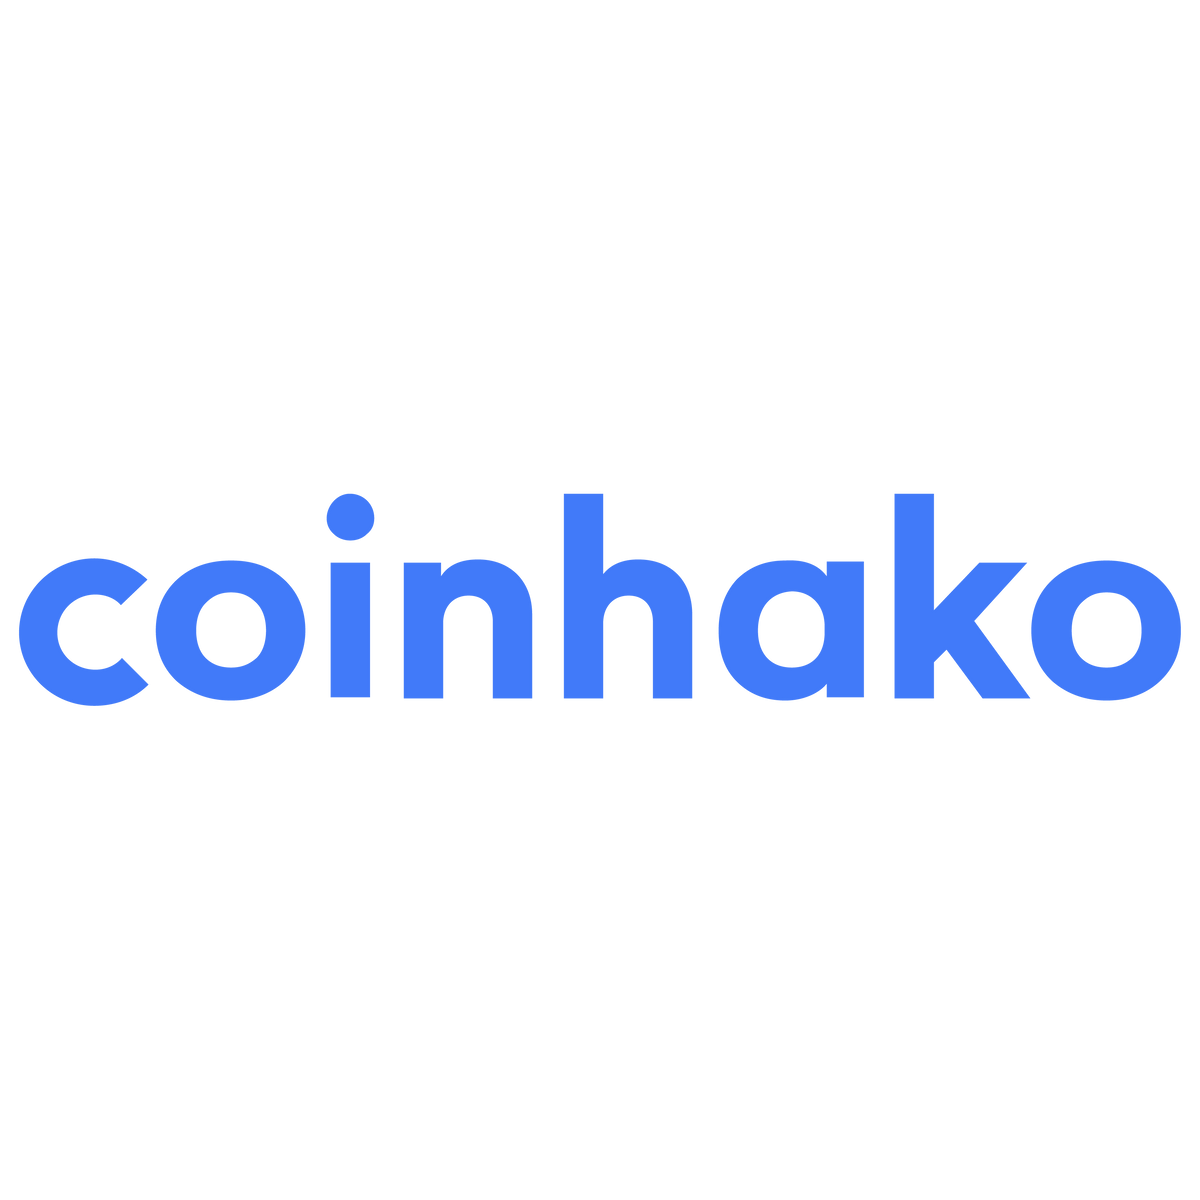 Coinhako’s update on recent crypto events